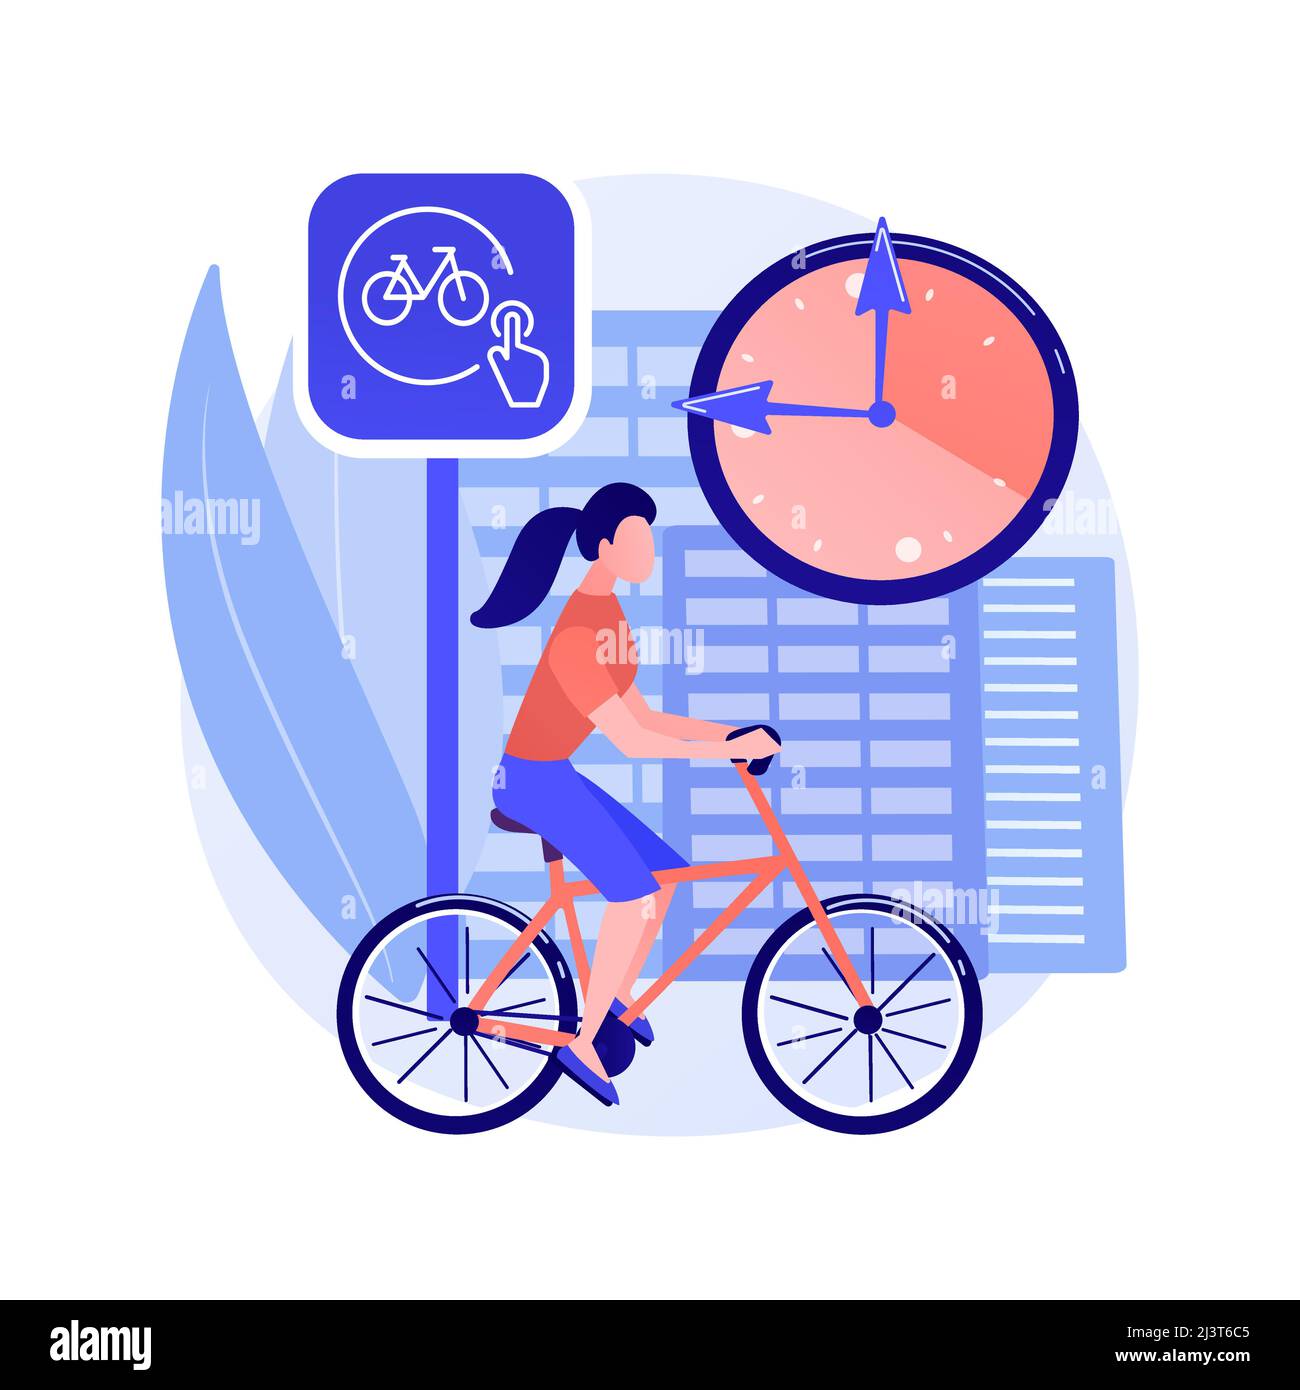 Bicycle sharing program Stock Vector Images